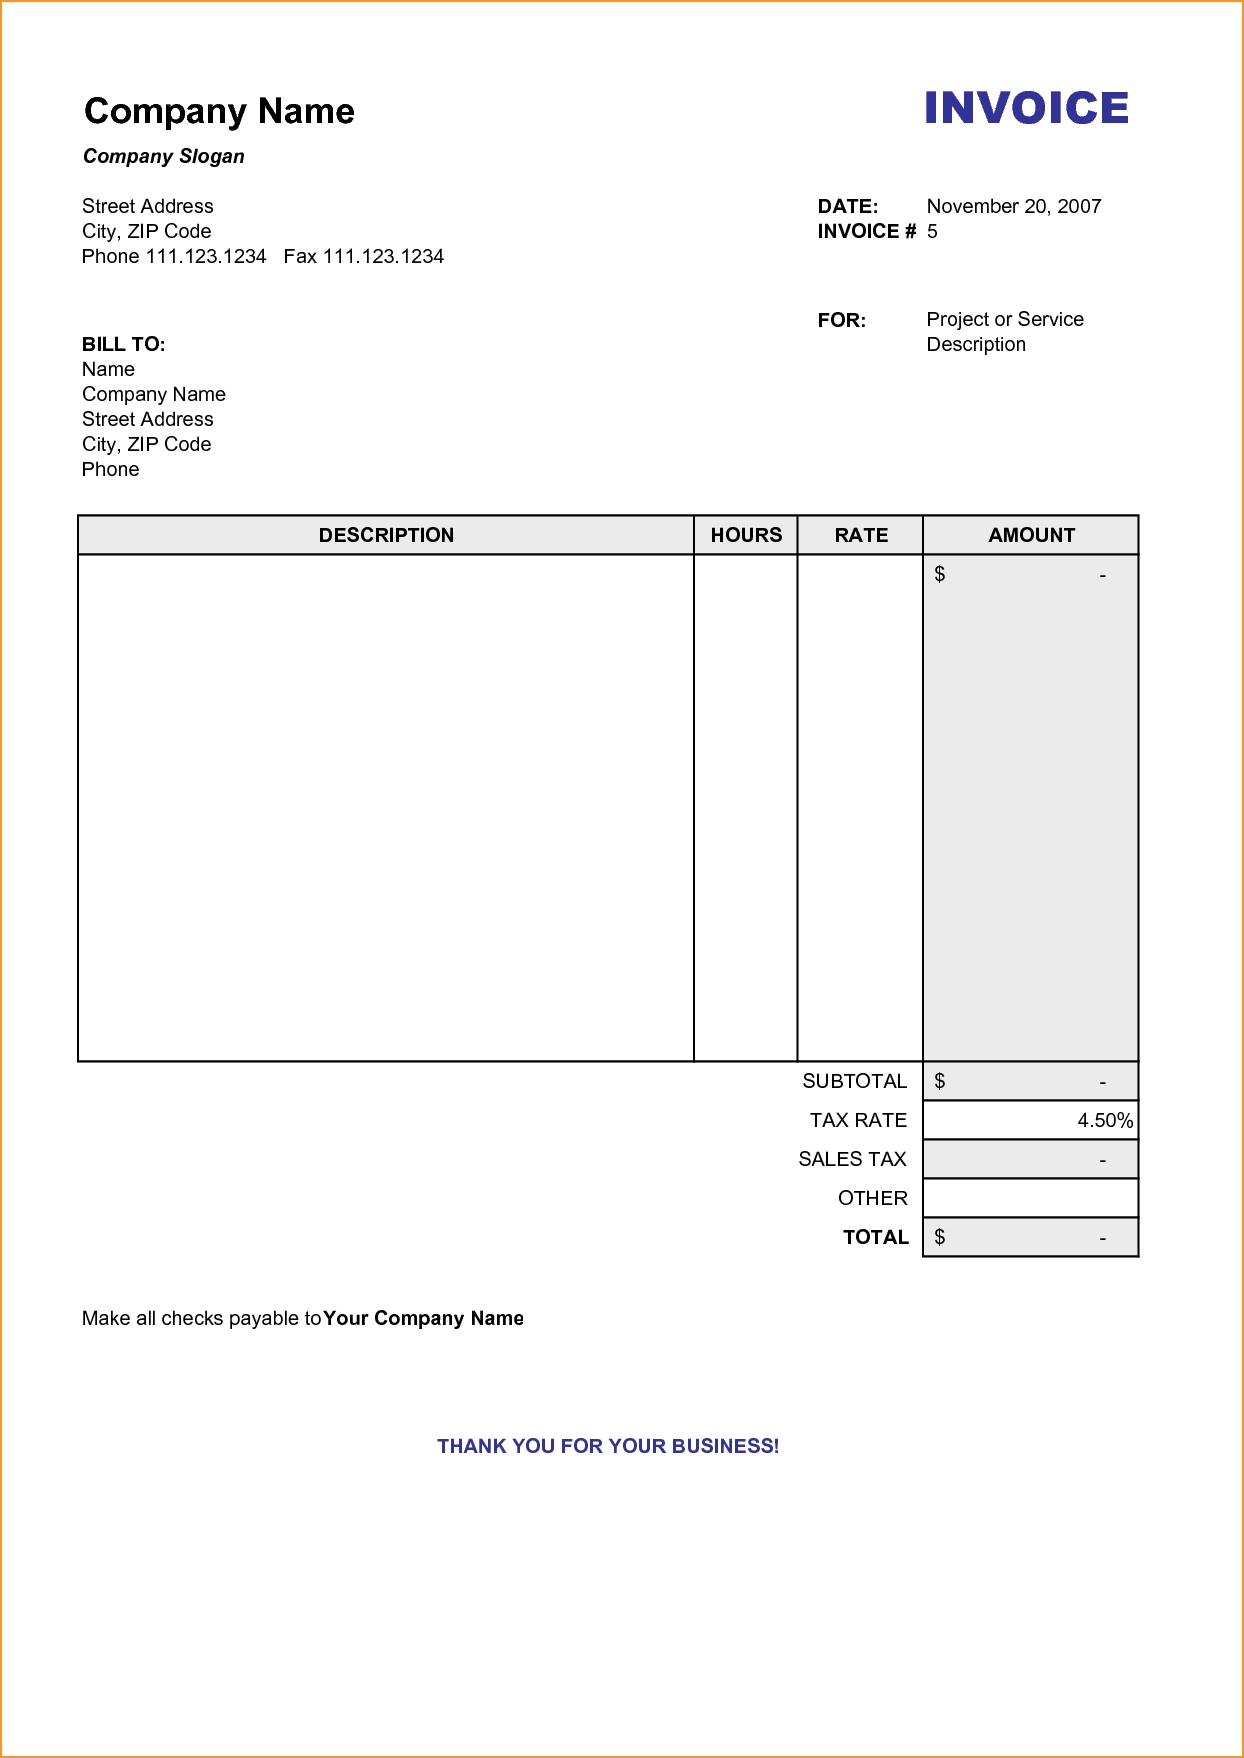 sage invoice template printable invoice template023 invoice a4 sage 3 manager 1244 X 1758